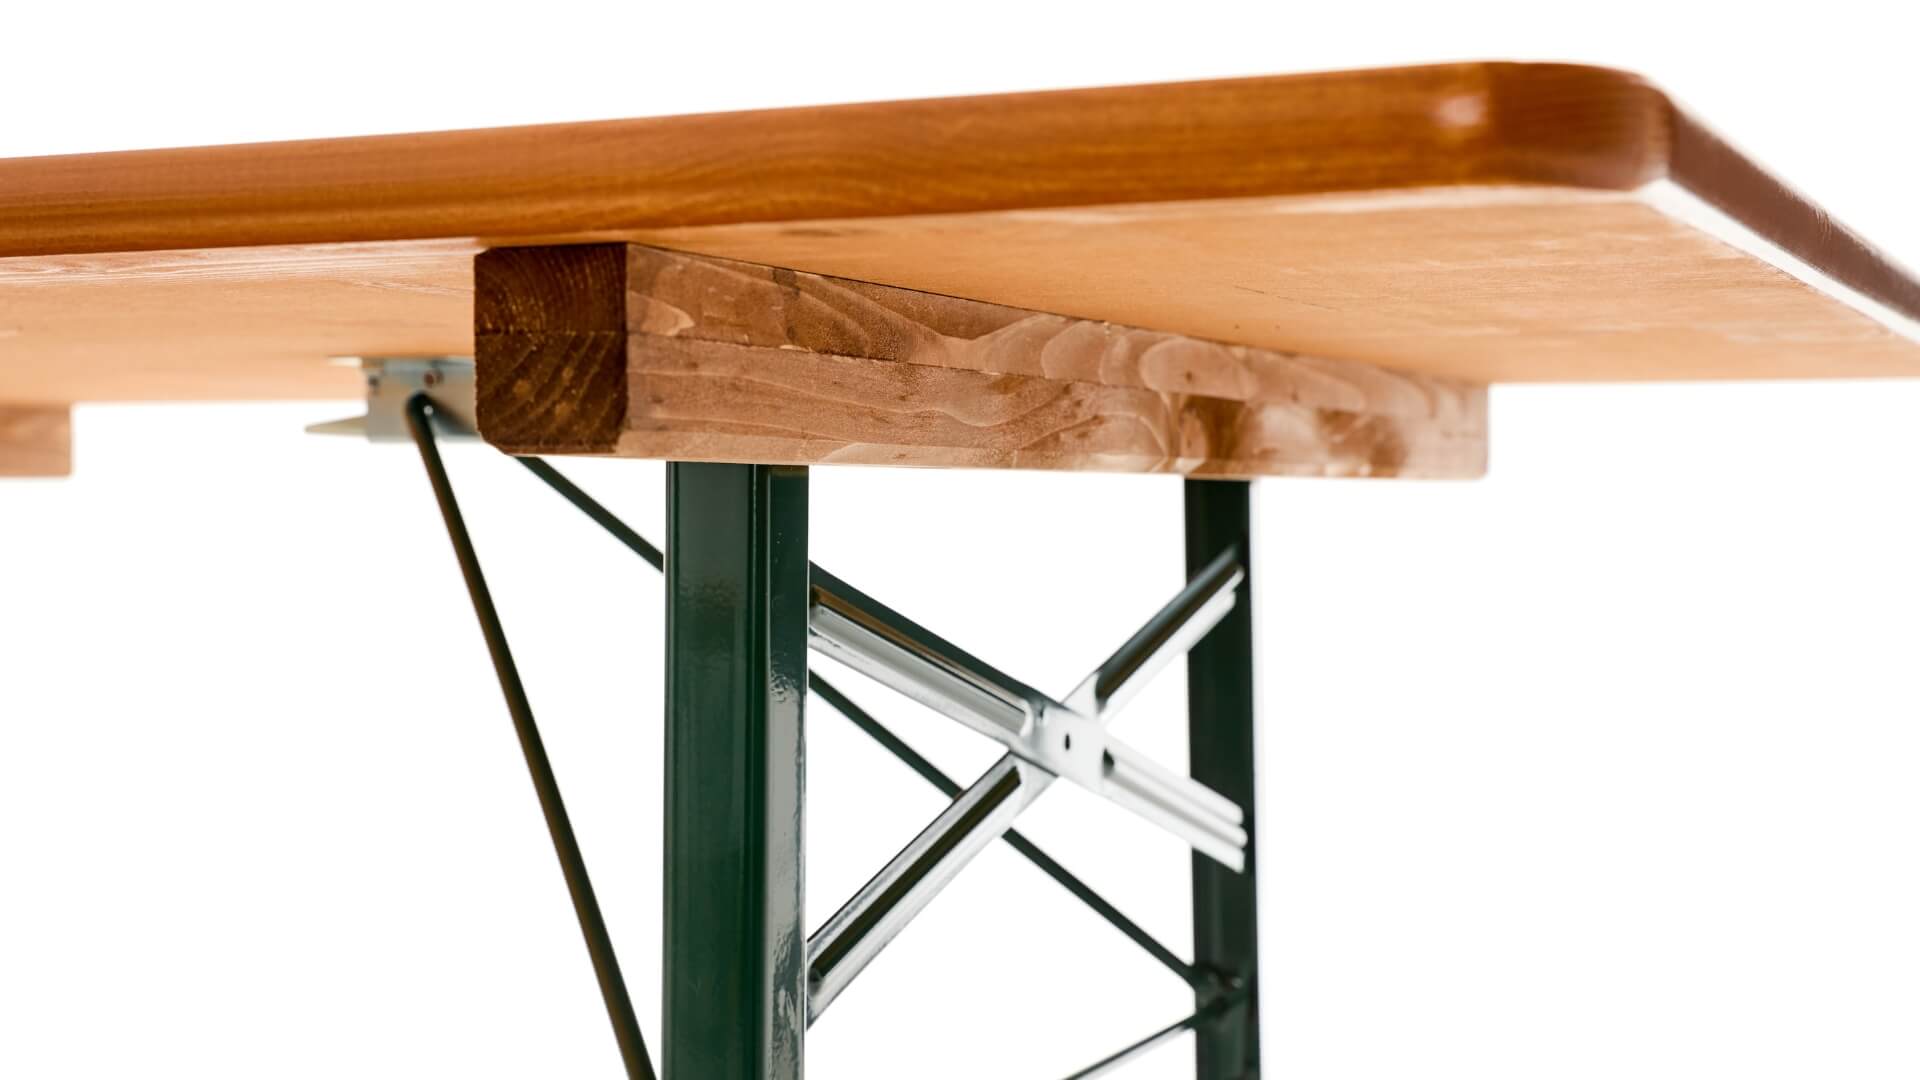 The stacking ledges of the wide beer garden table set protect the set during stacking, transportation and disassembly.